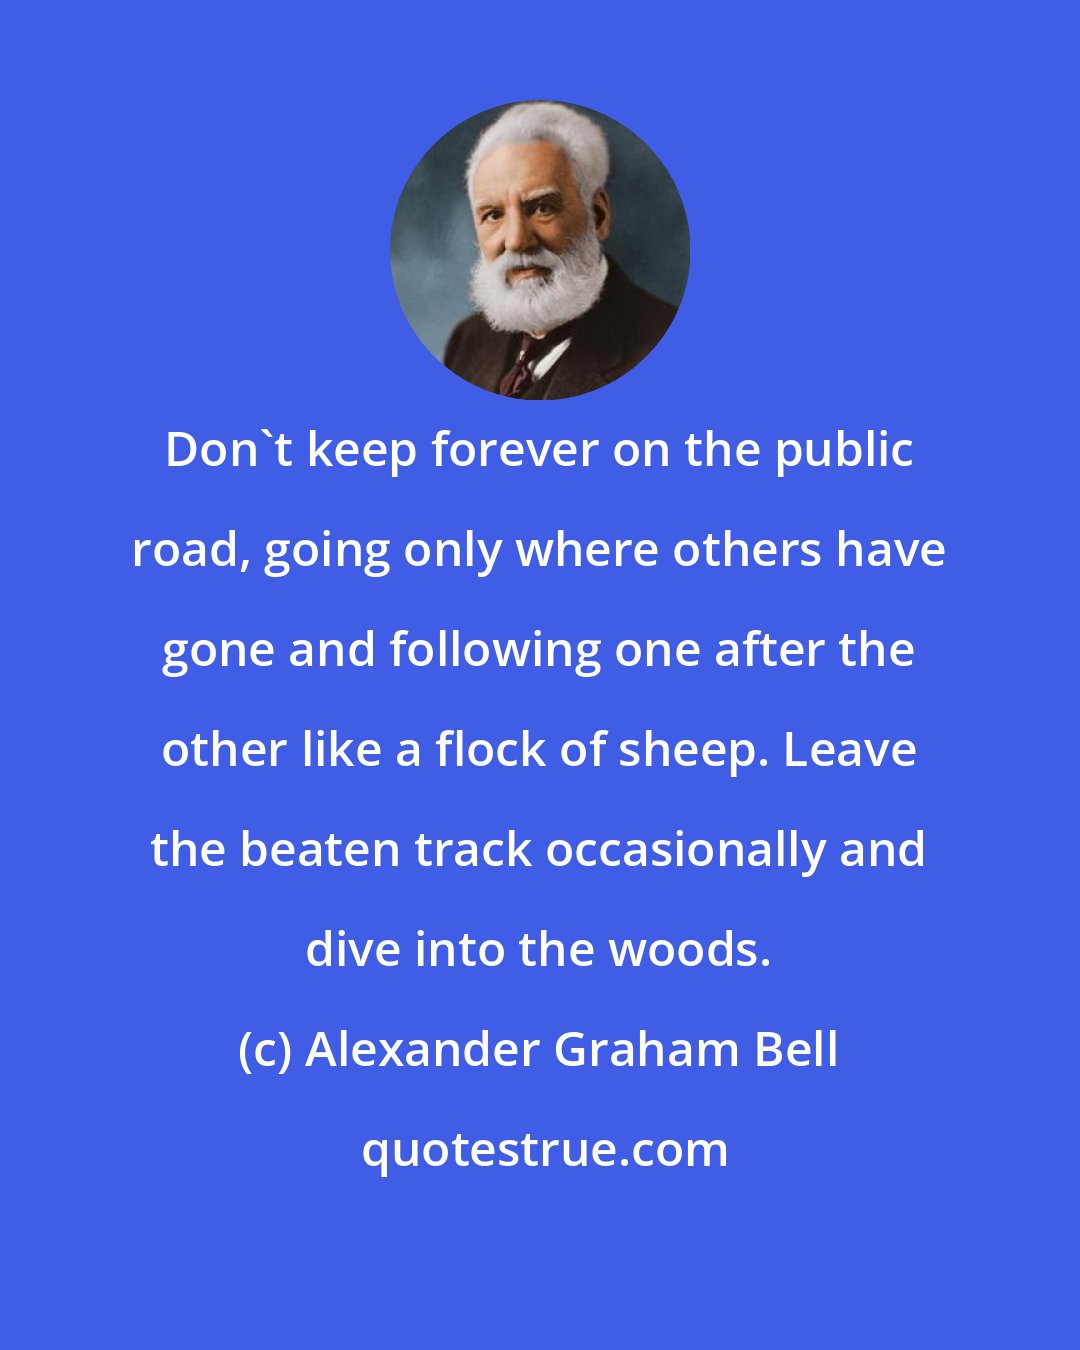 Alexander Graham Bell: Don't keep forever on the public road, going only where others have gone and following one after the other like a flock of sheep. Leave the beaten track occasionally and dive into the woods.